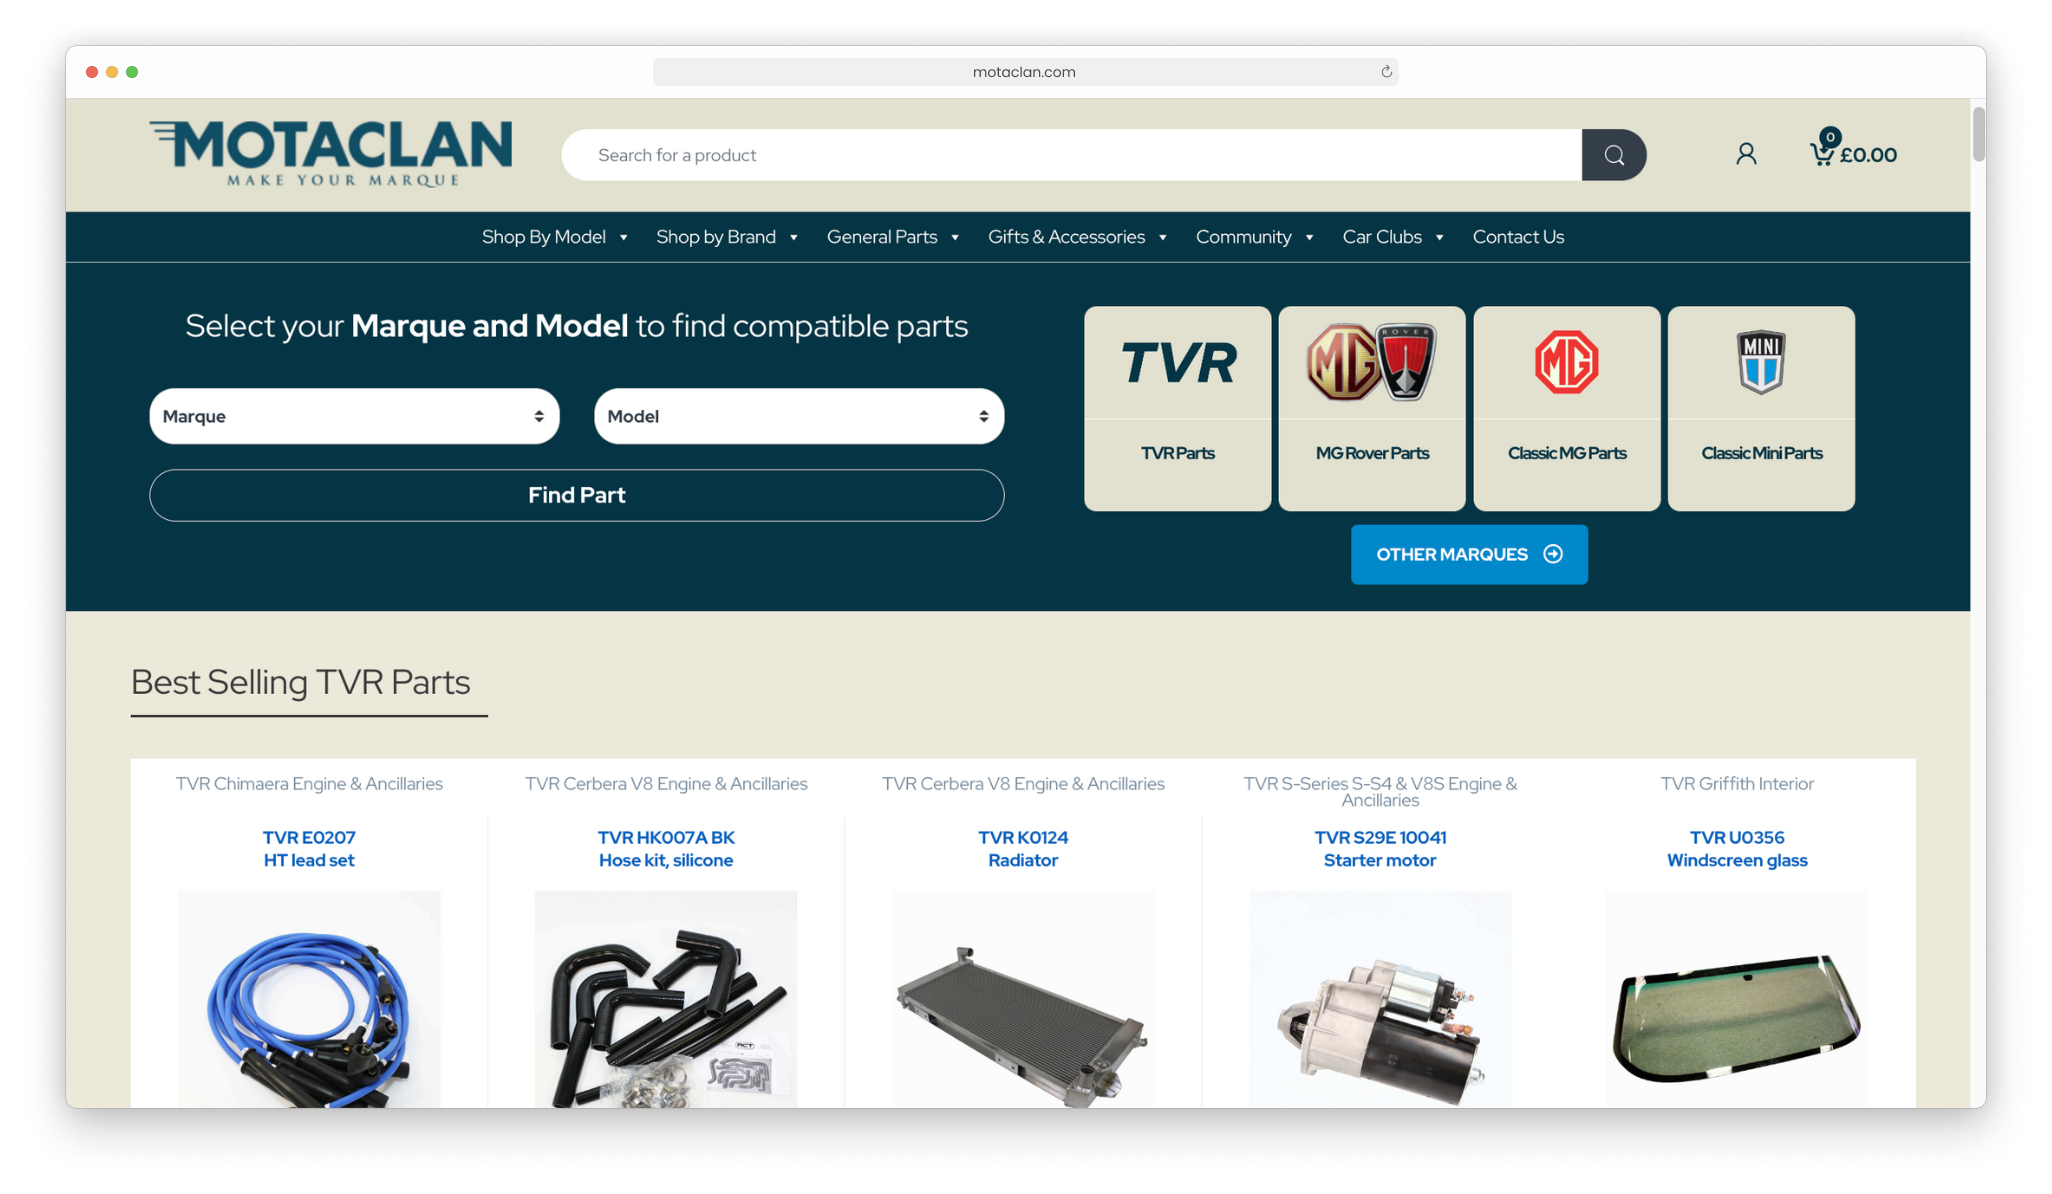 Motaclan eCommerce website front page, showing various automotive products on and their advanced search fields